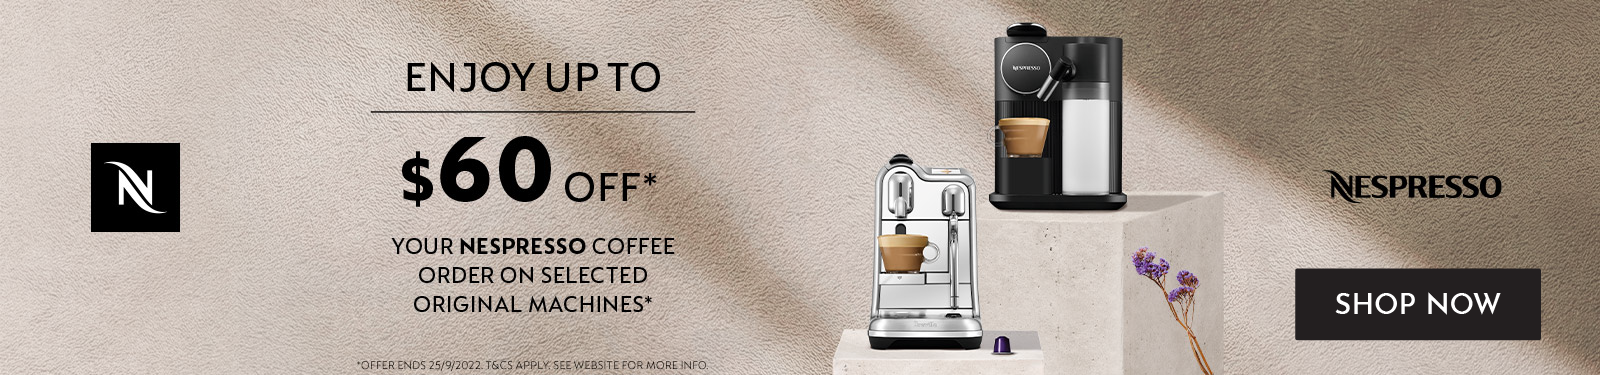 Enjoy Up To $60 Off* Your Nespresso Coffee Order at Retravision